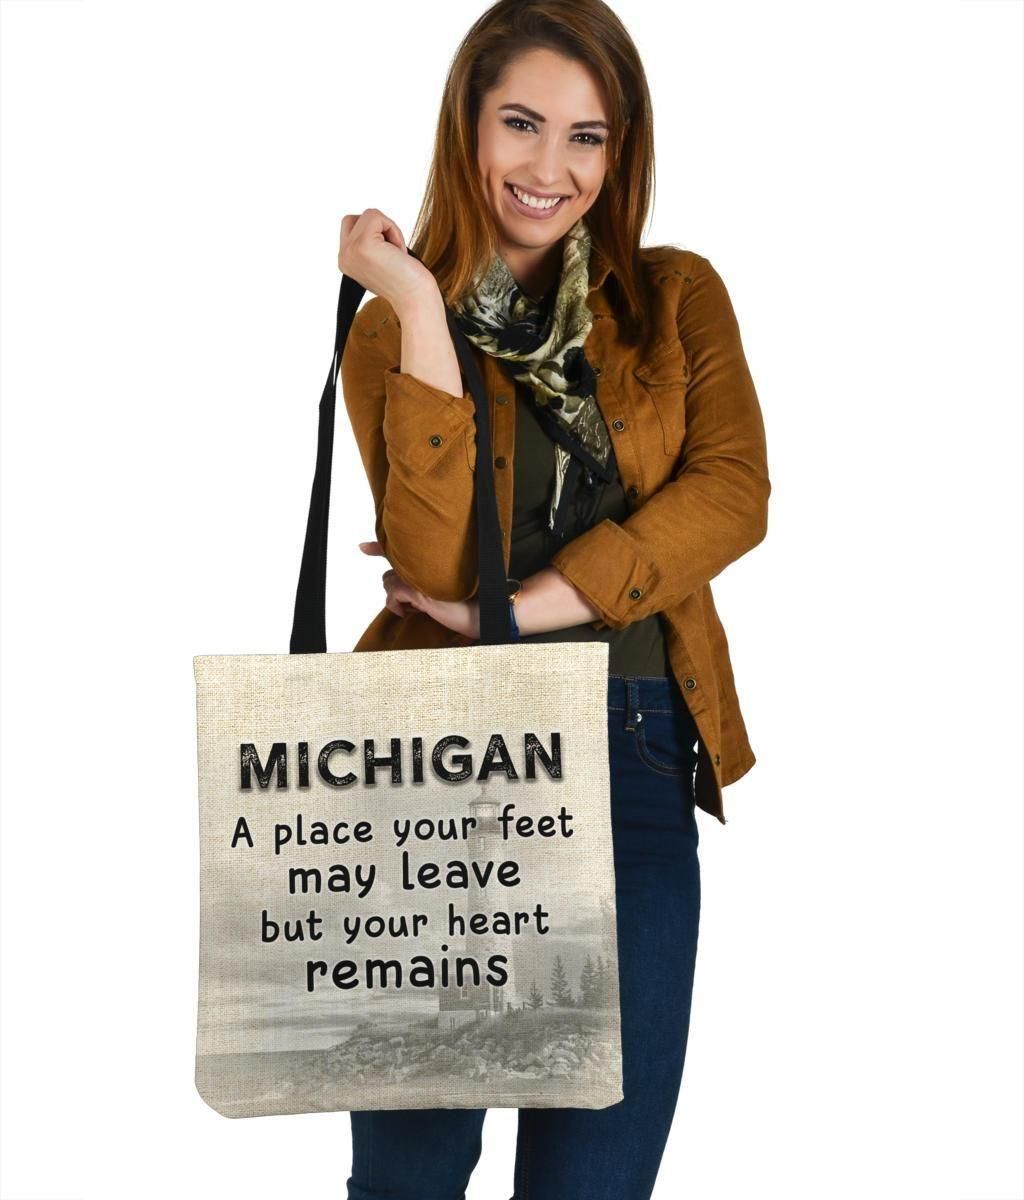 Michigan A Place Your Feet Leave Your Heart Remains Tote Bag